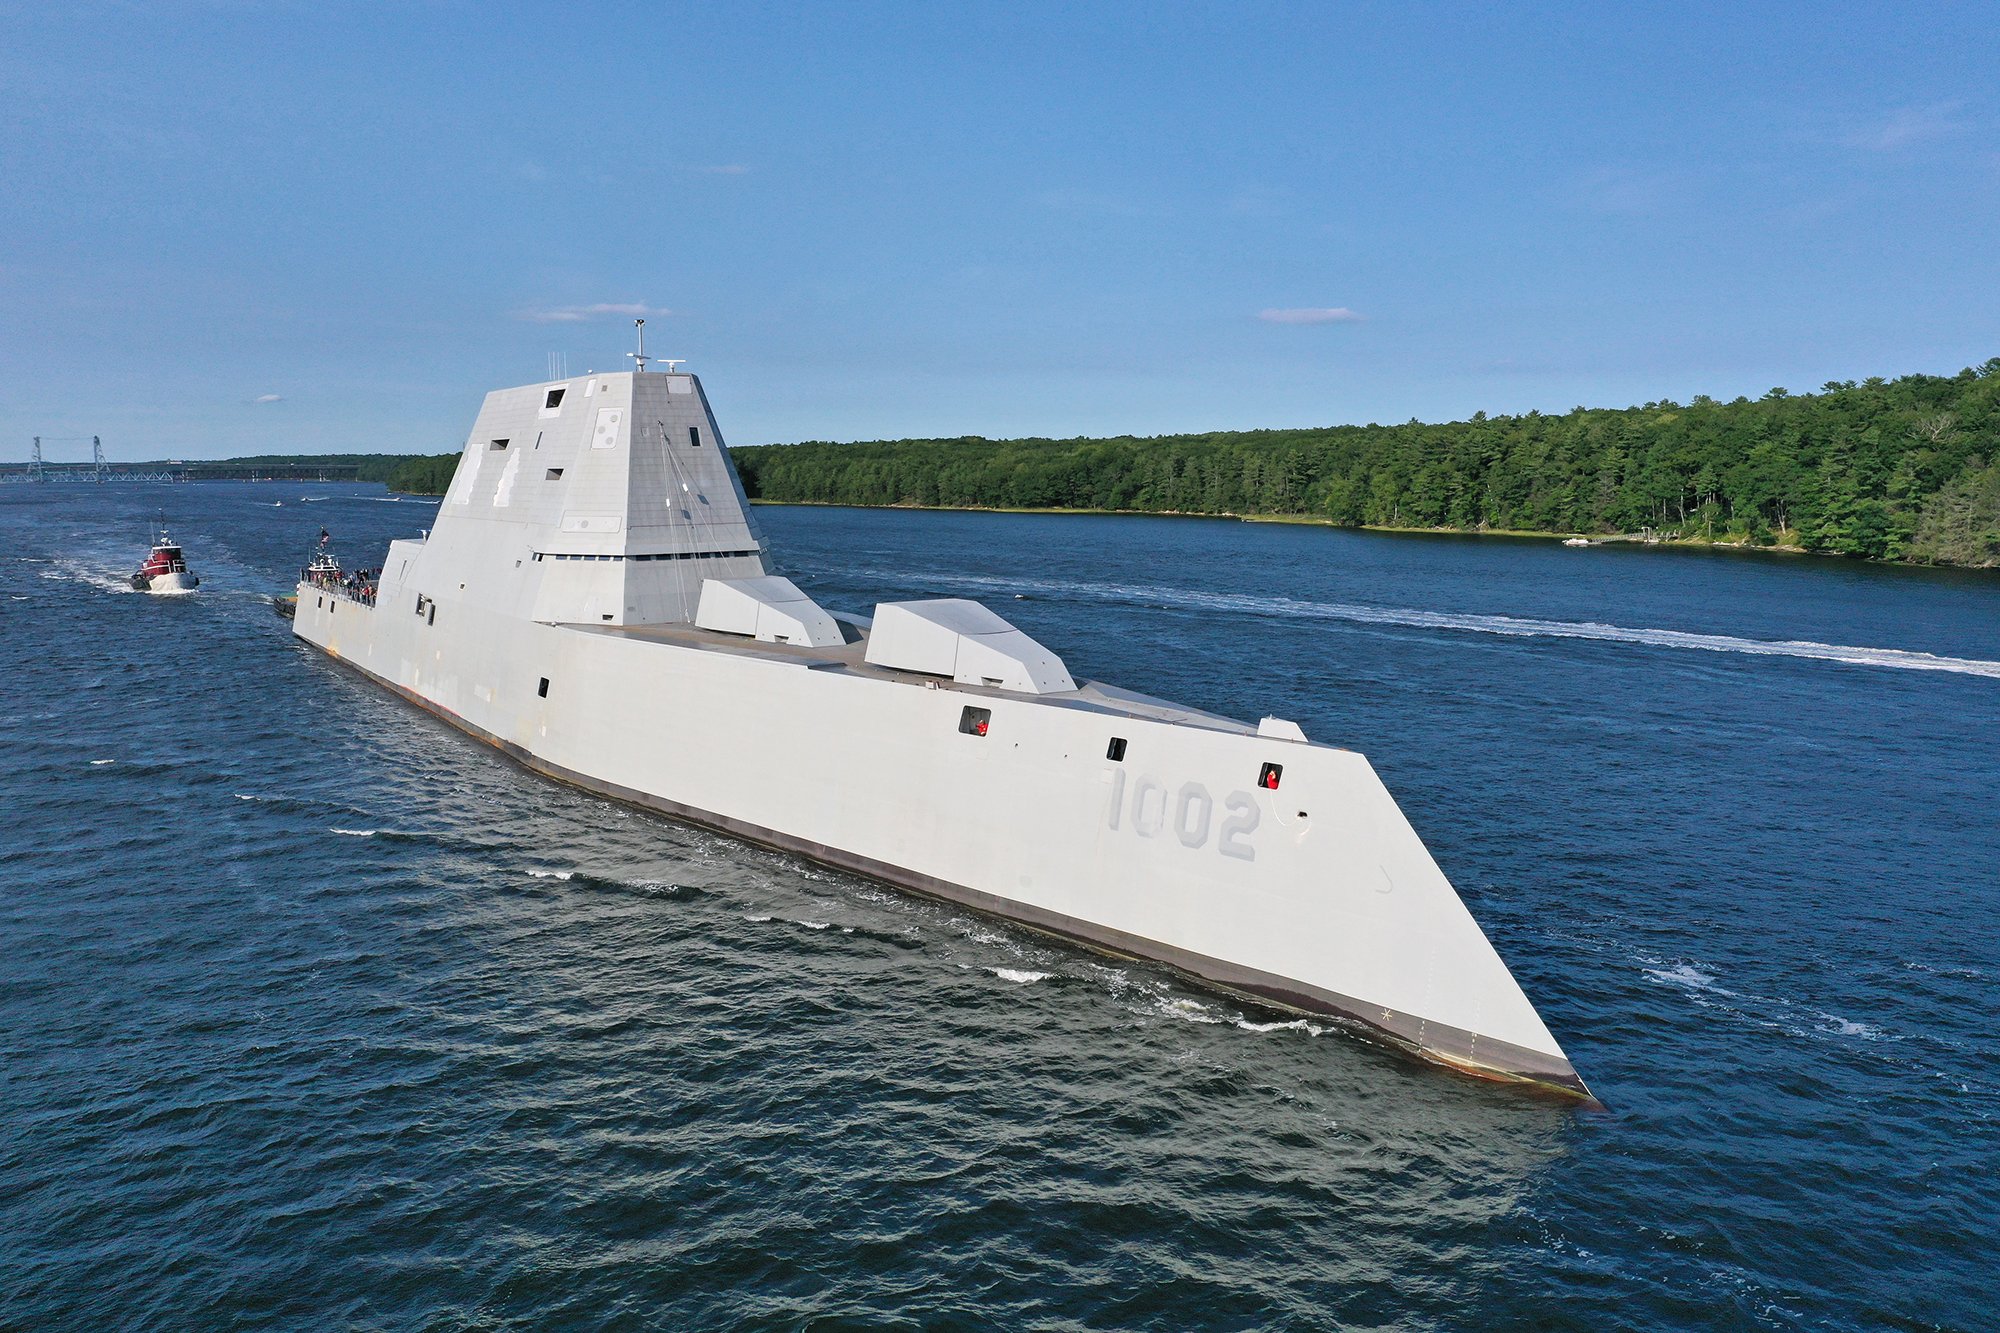 Last Zumwalt Destroyer Completes Builder&#39;s Trials - Breaking Defense Breaking Defense - Defense industry news, analysis and commentary